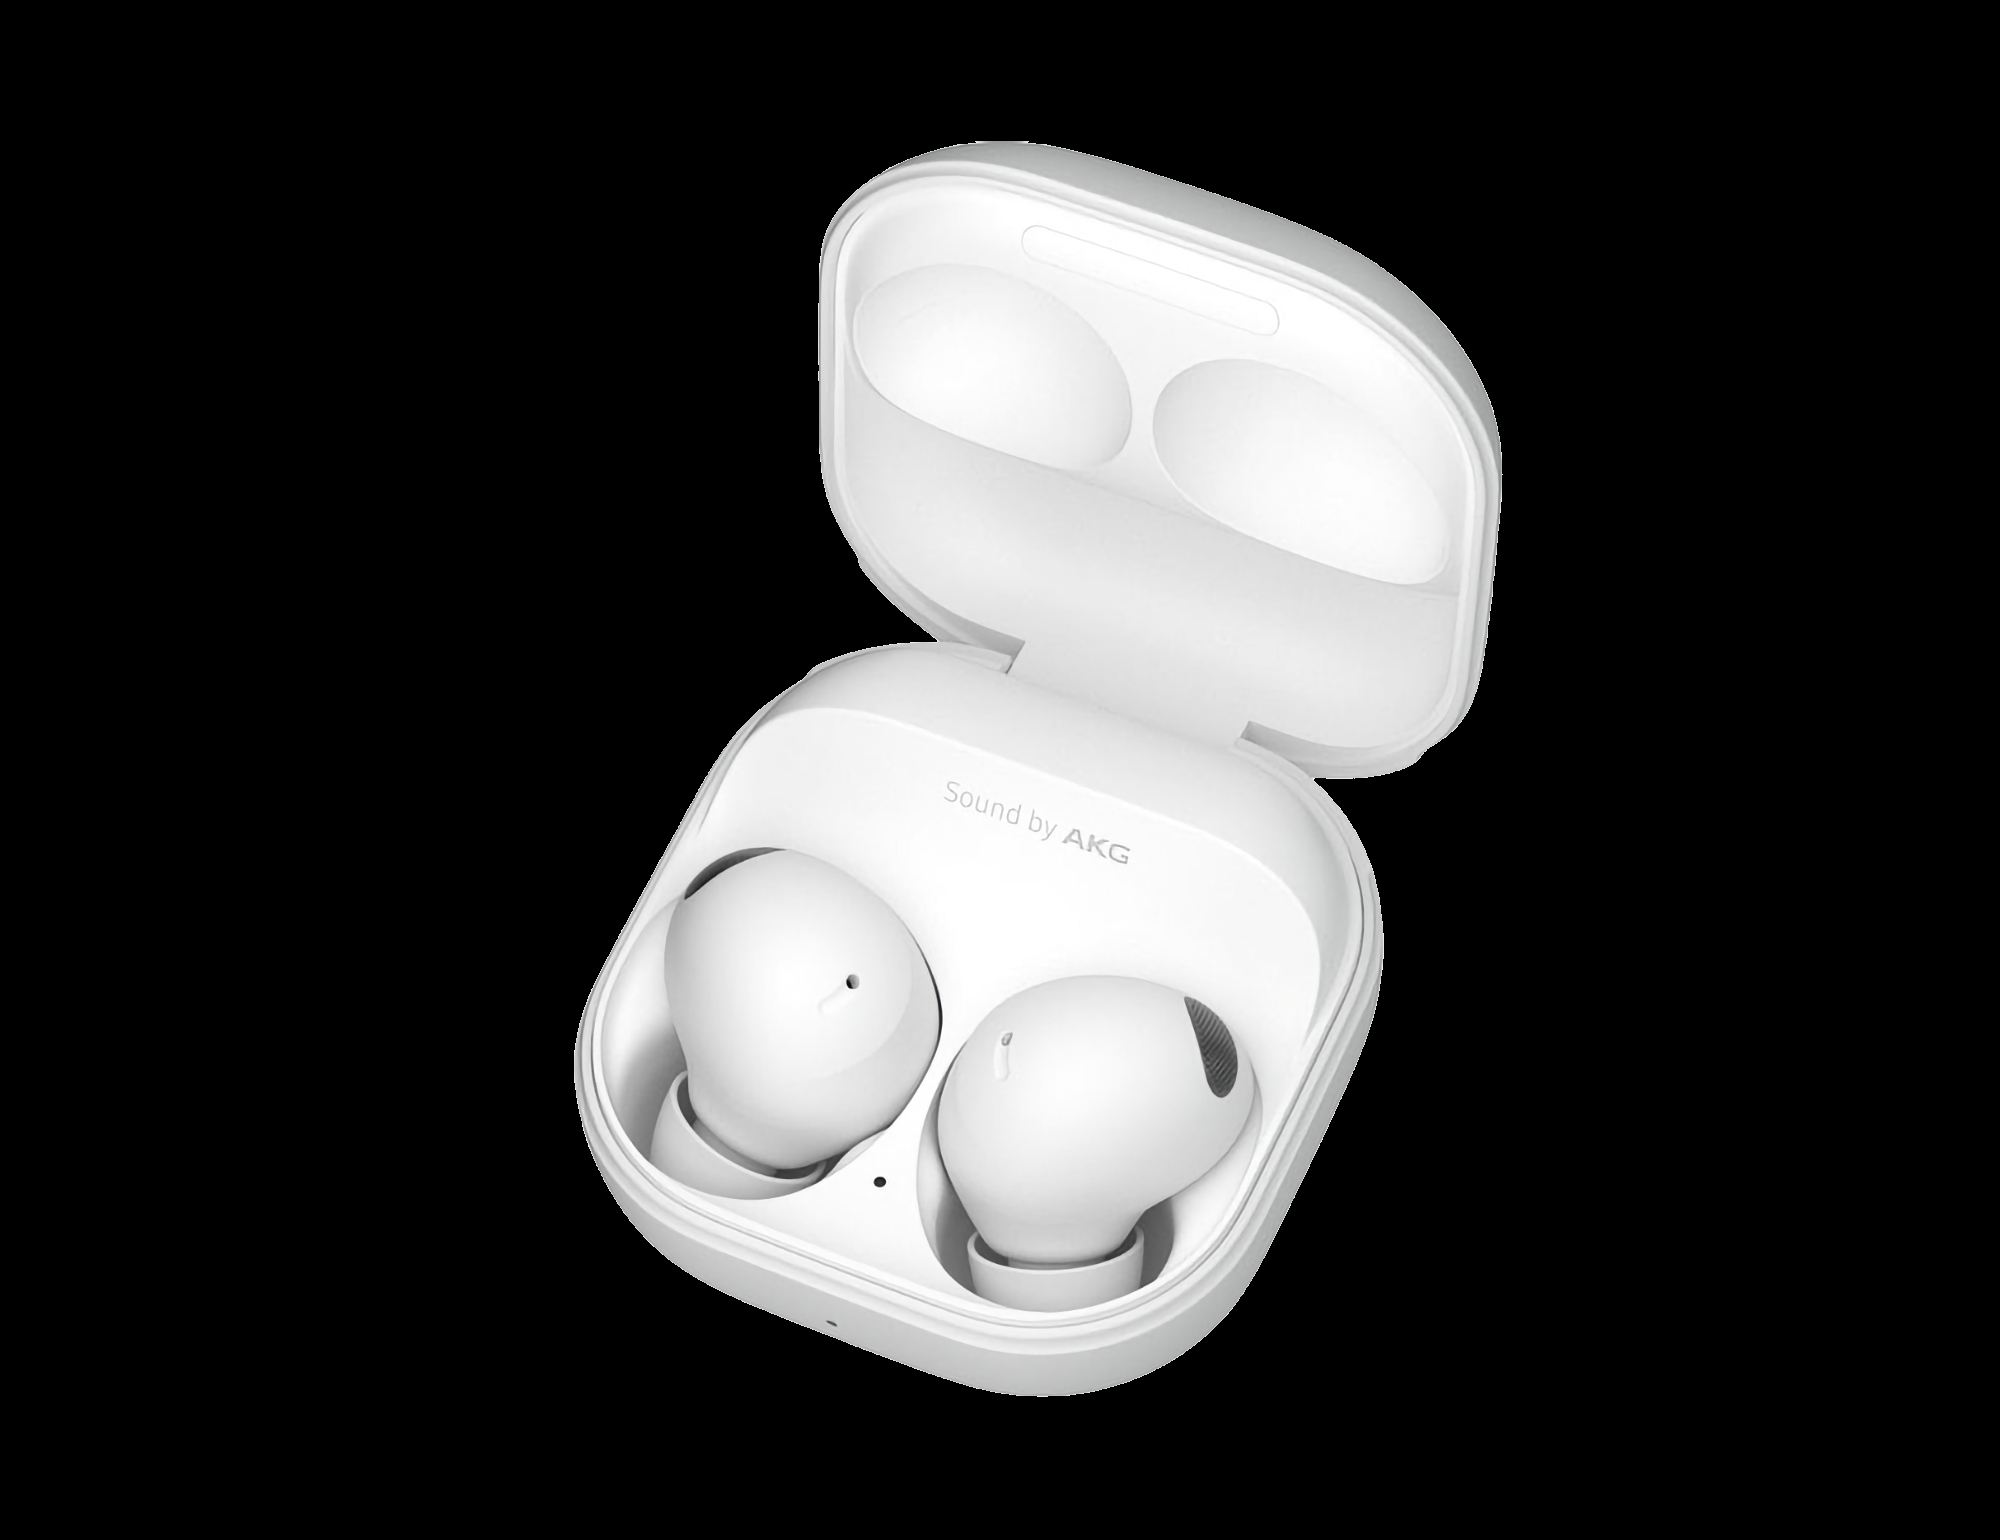 Samsung has released a new software update for the Galaxy Buds 2 Pro